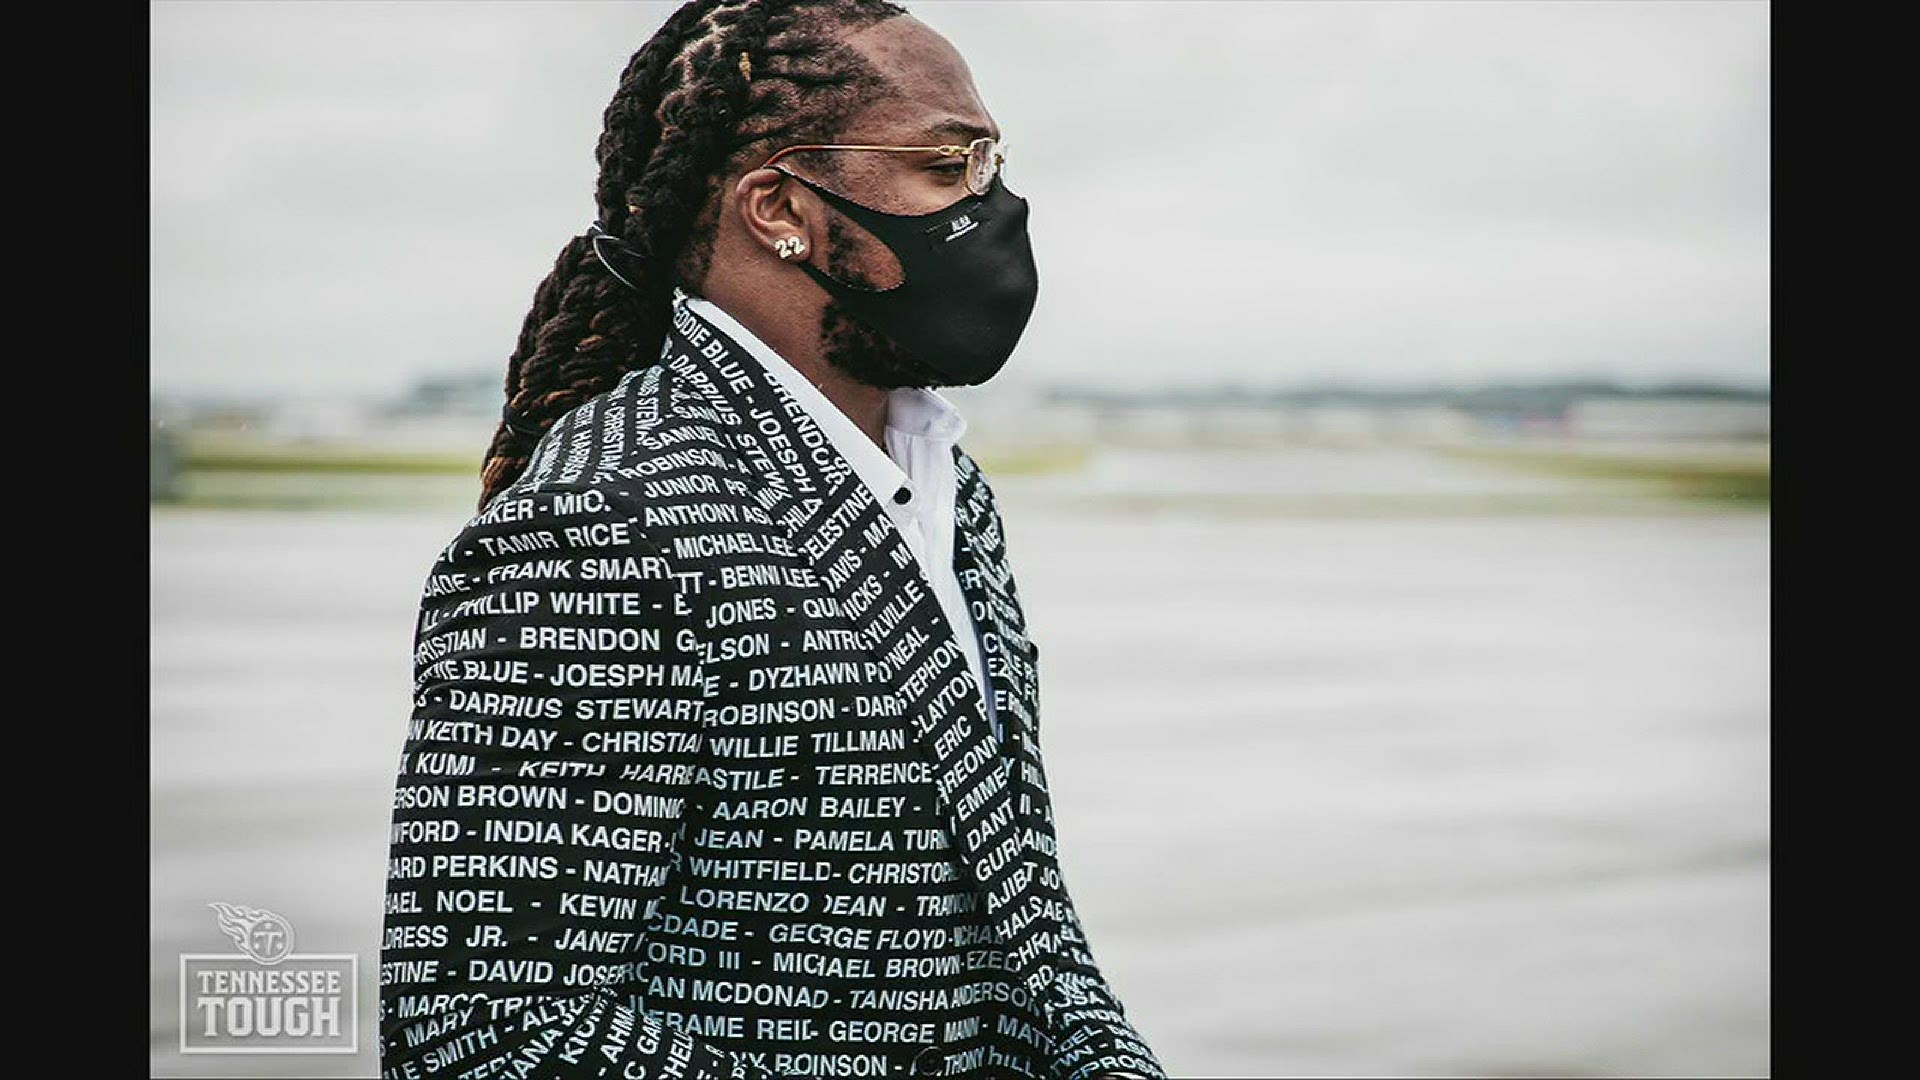 Derrick Henry sported a suit with names honoring victims of racial injustice.